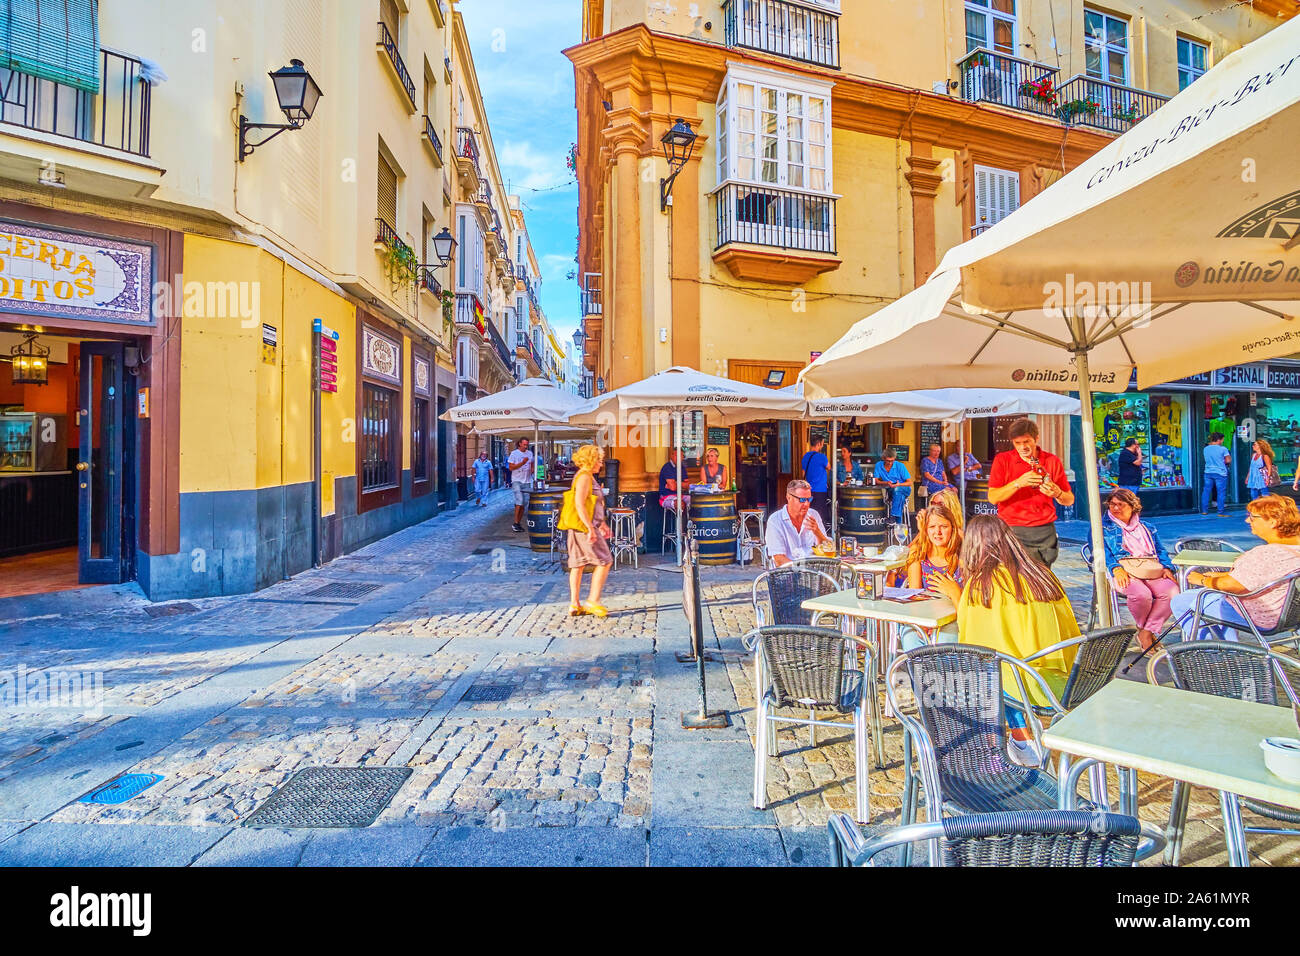 CADIZ, SPAIN - SEPTEMBER 19, 2019: The Traditional restaurants in old Cadiz offer delicious dishes of mediterranean and Andalusian cuisine, on Septemb Stock Photo